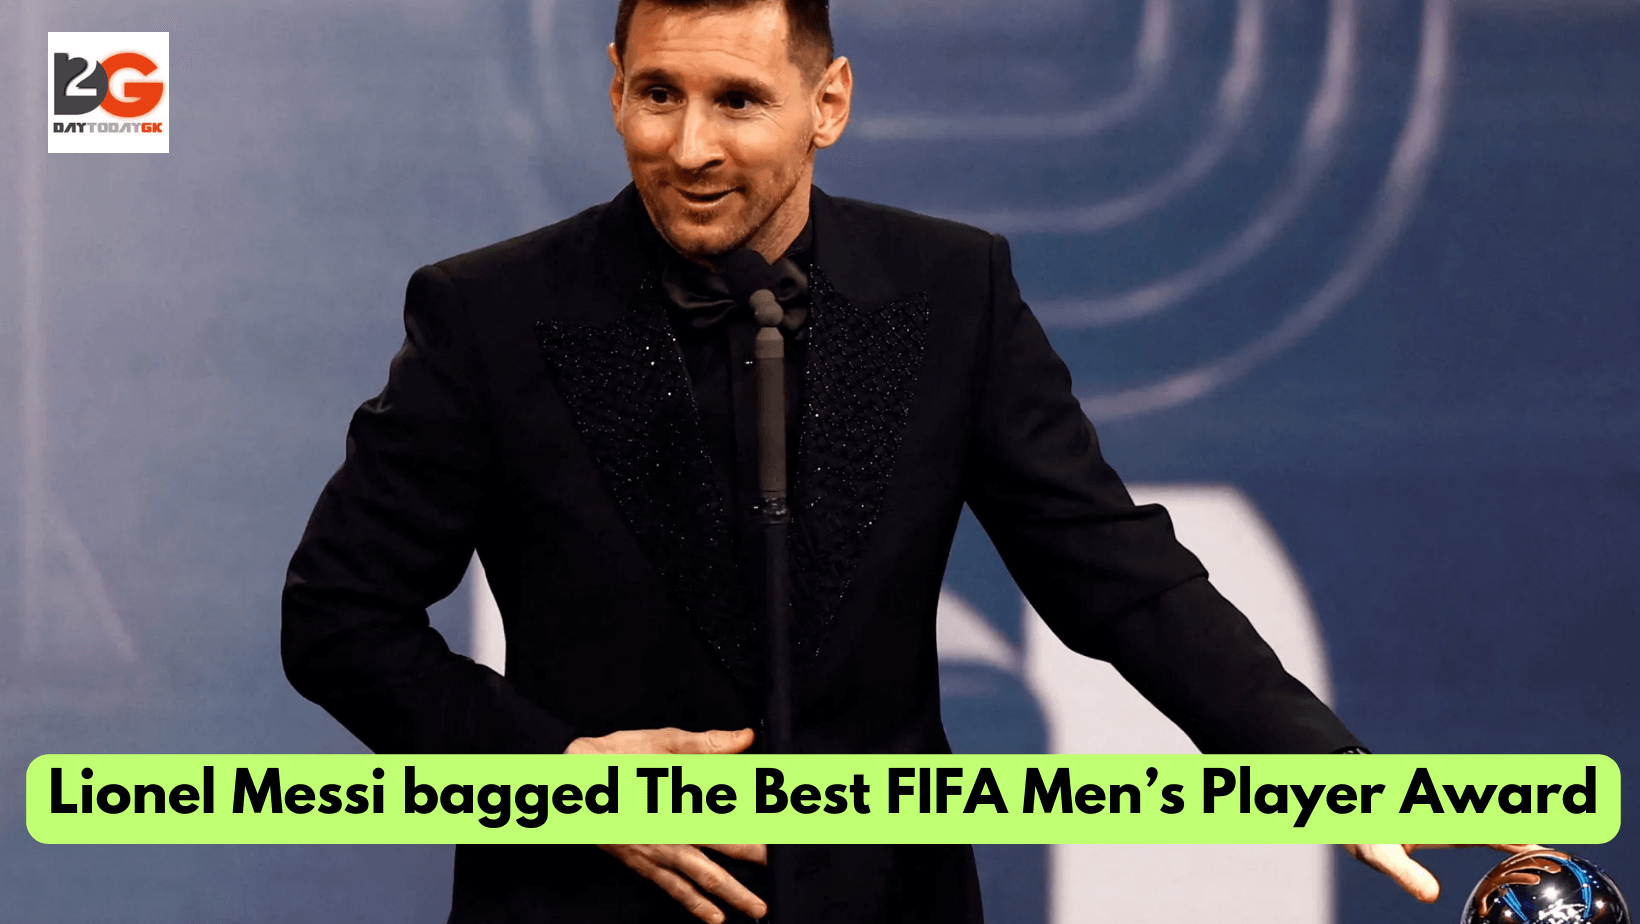 Lionel Messi bagged The Best FIFA Men’s Player Award